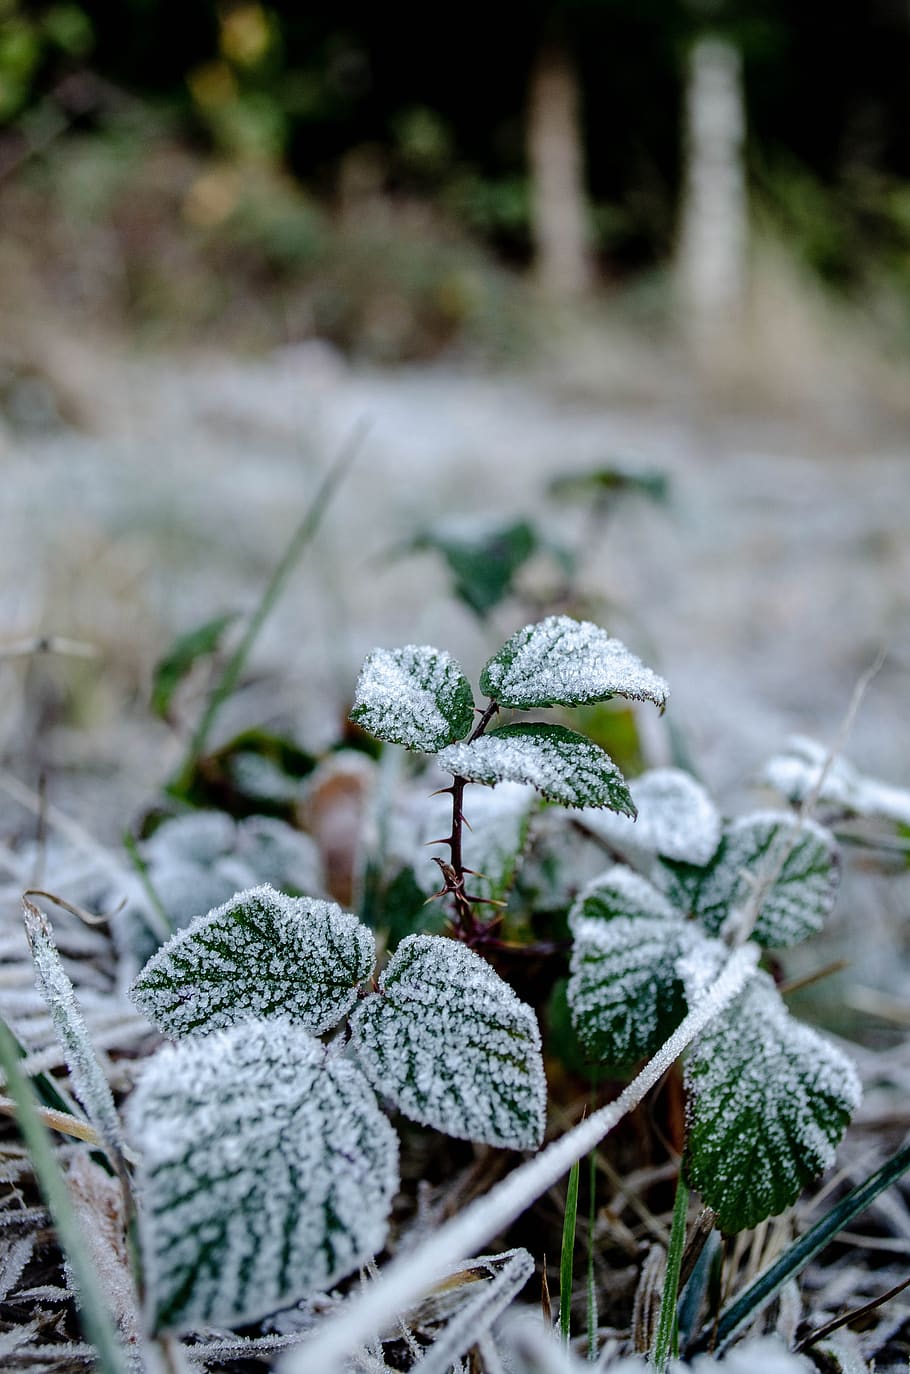 frost, berries, leaves, winter, ice, nature, snow, bush, plant, cold